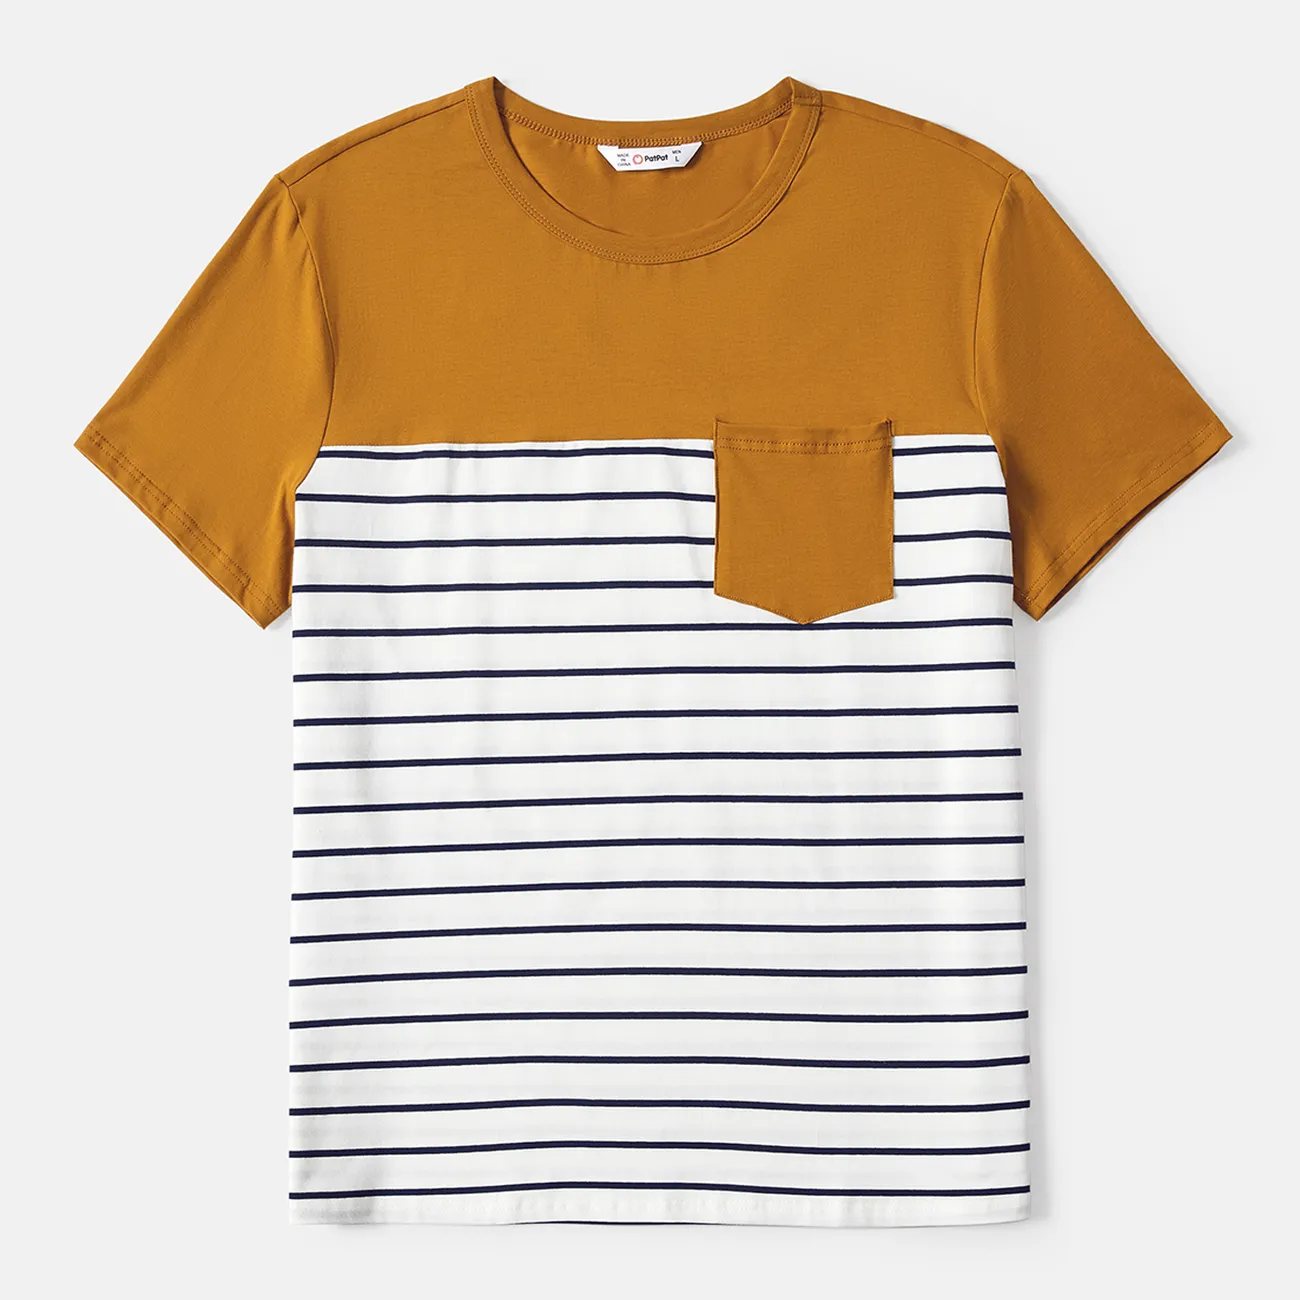 Family Matching 95% Cotton Striped Off Shoulder Belted Dresses and Short-sleeve Colorblock T-shirts Sets YellowBrown big image 1